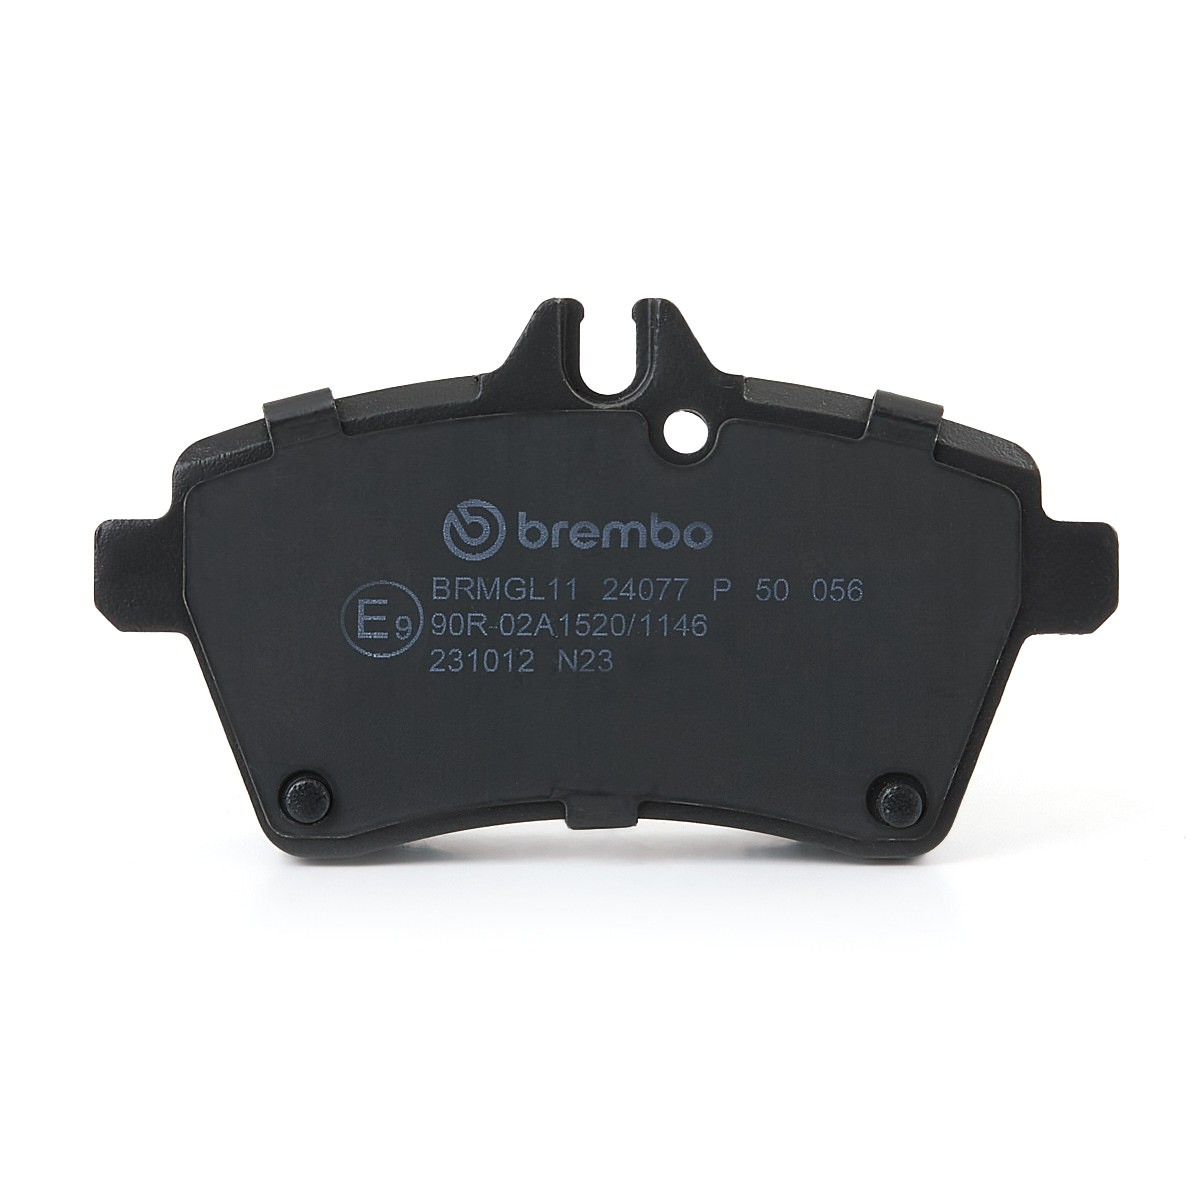 BREMBO Brake pad kit P 50 056 suitable for MERCEDES-BENZ A-Class, B-Class